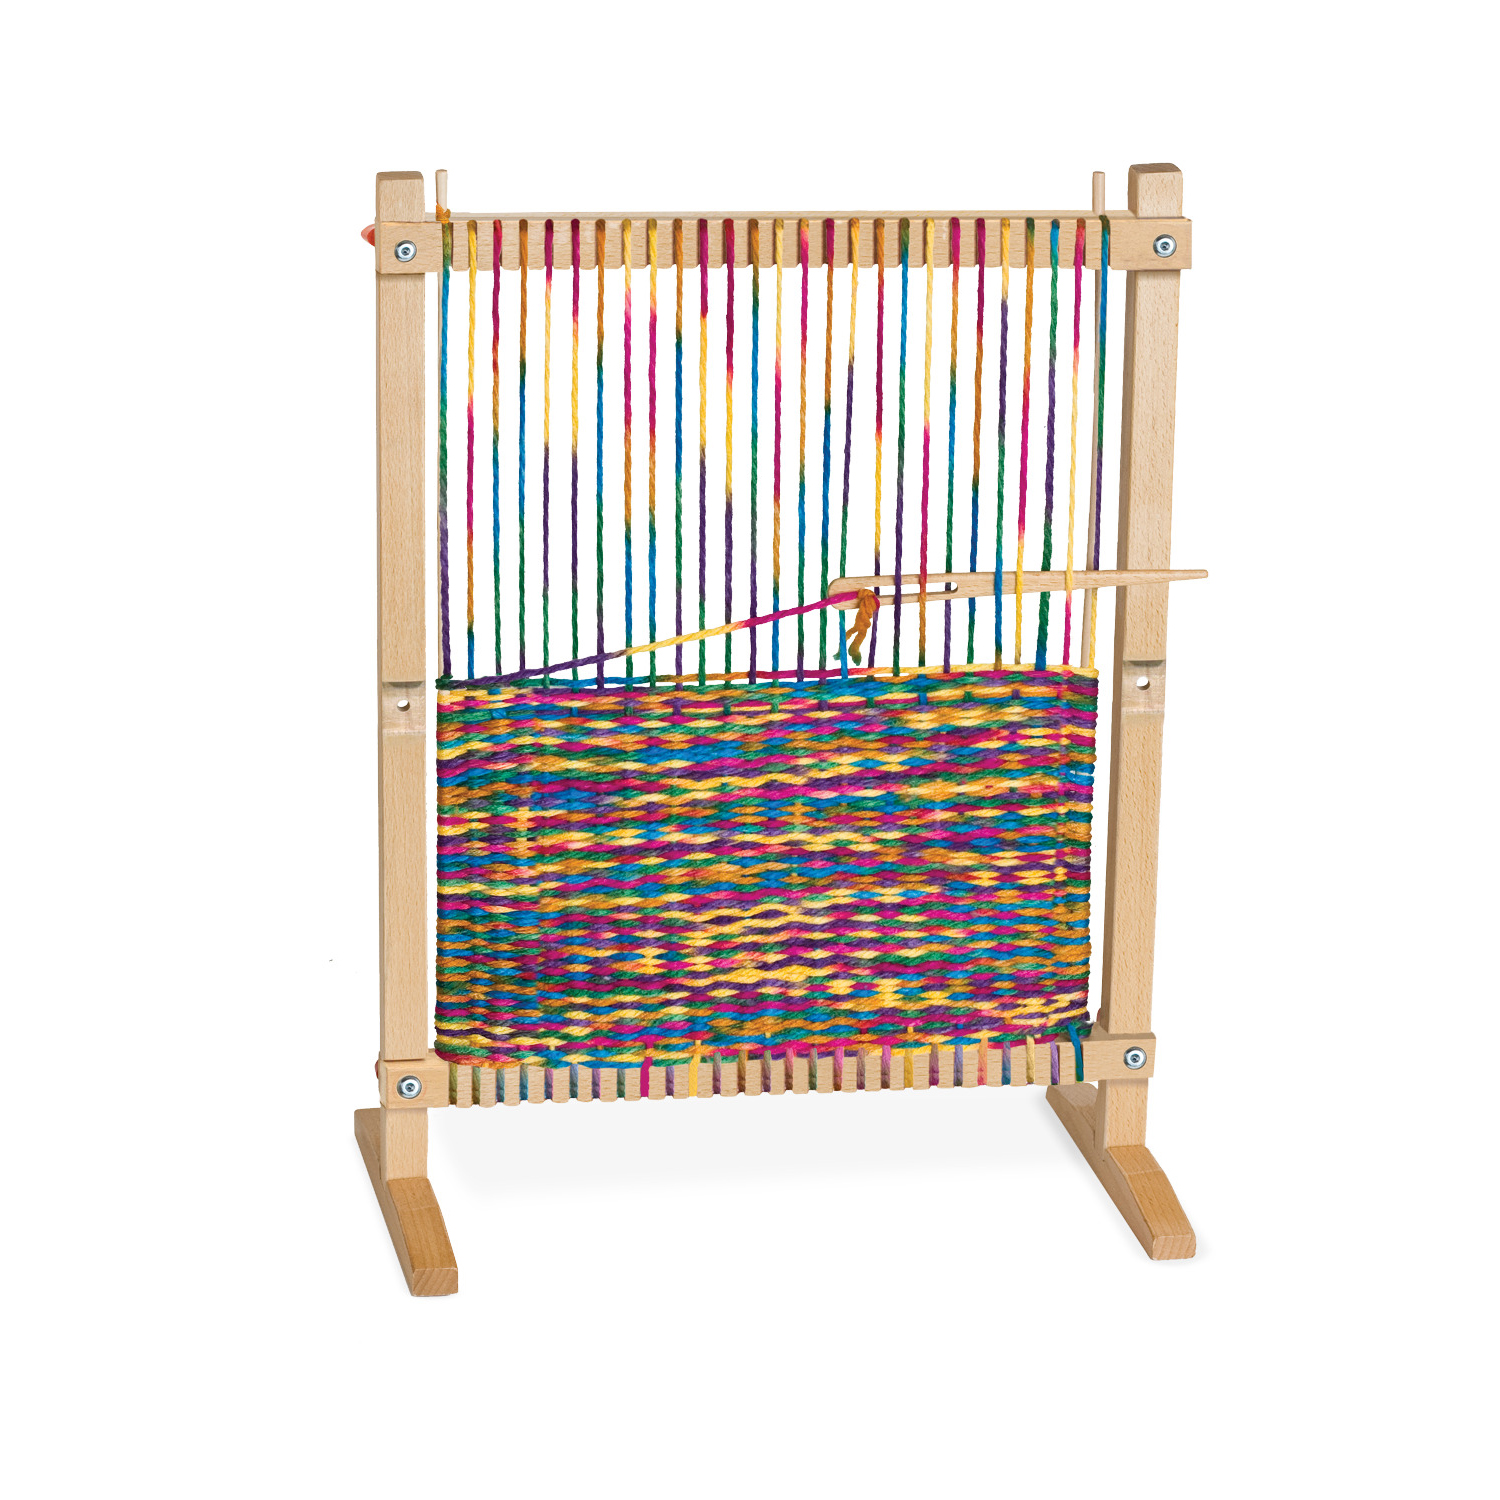 Wooden Multi-craft Weaving Loom, Arts & Crafts, Extra-large Frame, Develops Creativity And Motor Skills, 16.5" H X 22.75